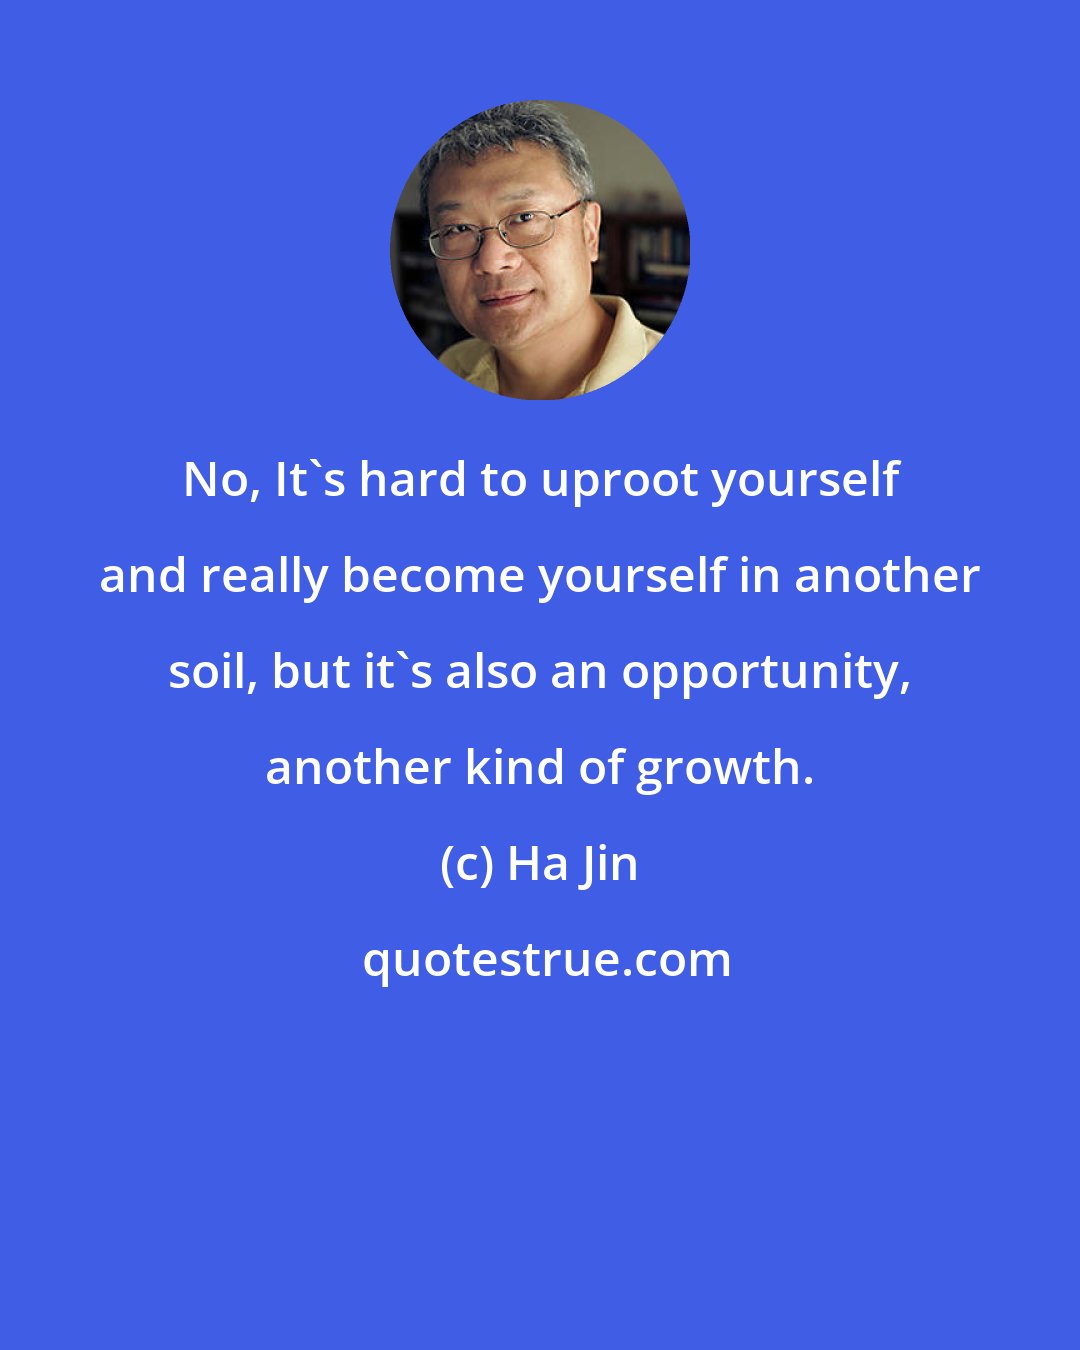 Ha Jin: No, It's hard to uproot yourself and really become yourself in another soil, but it's also an opportunity, another kind of growth.